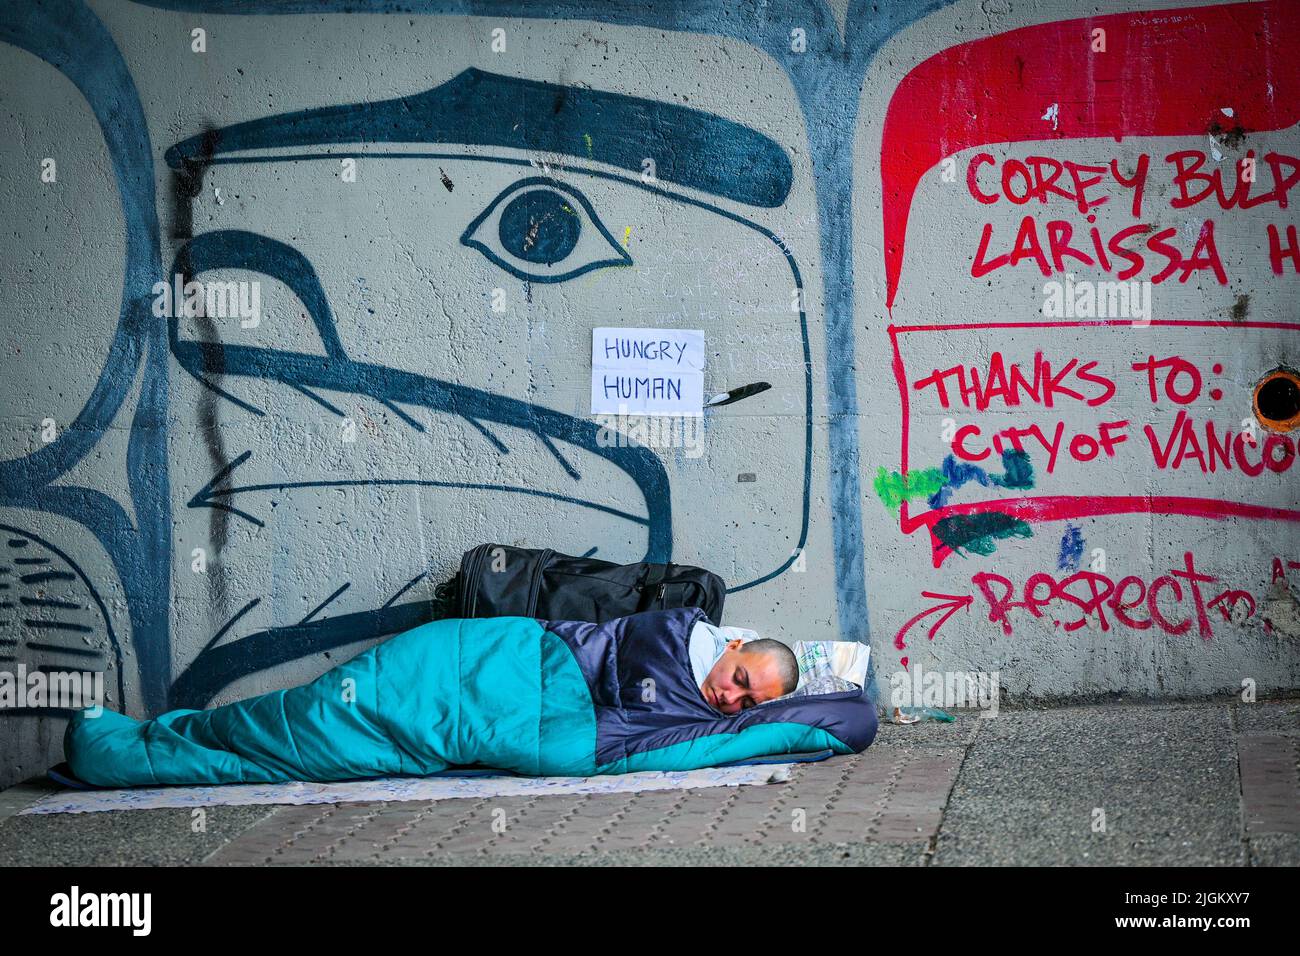 Hungry homeless person sleeping under overpass, Vancouver, British Columbia, Canada Stock Photo